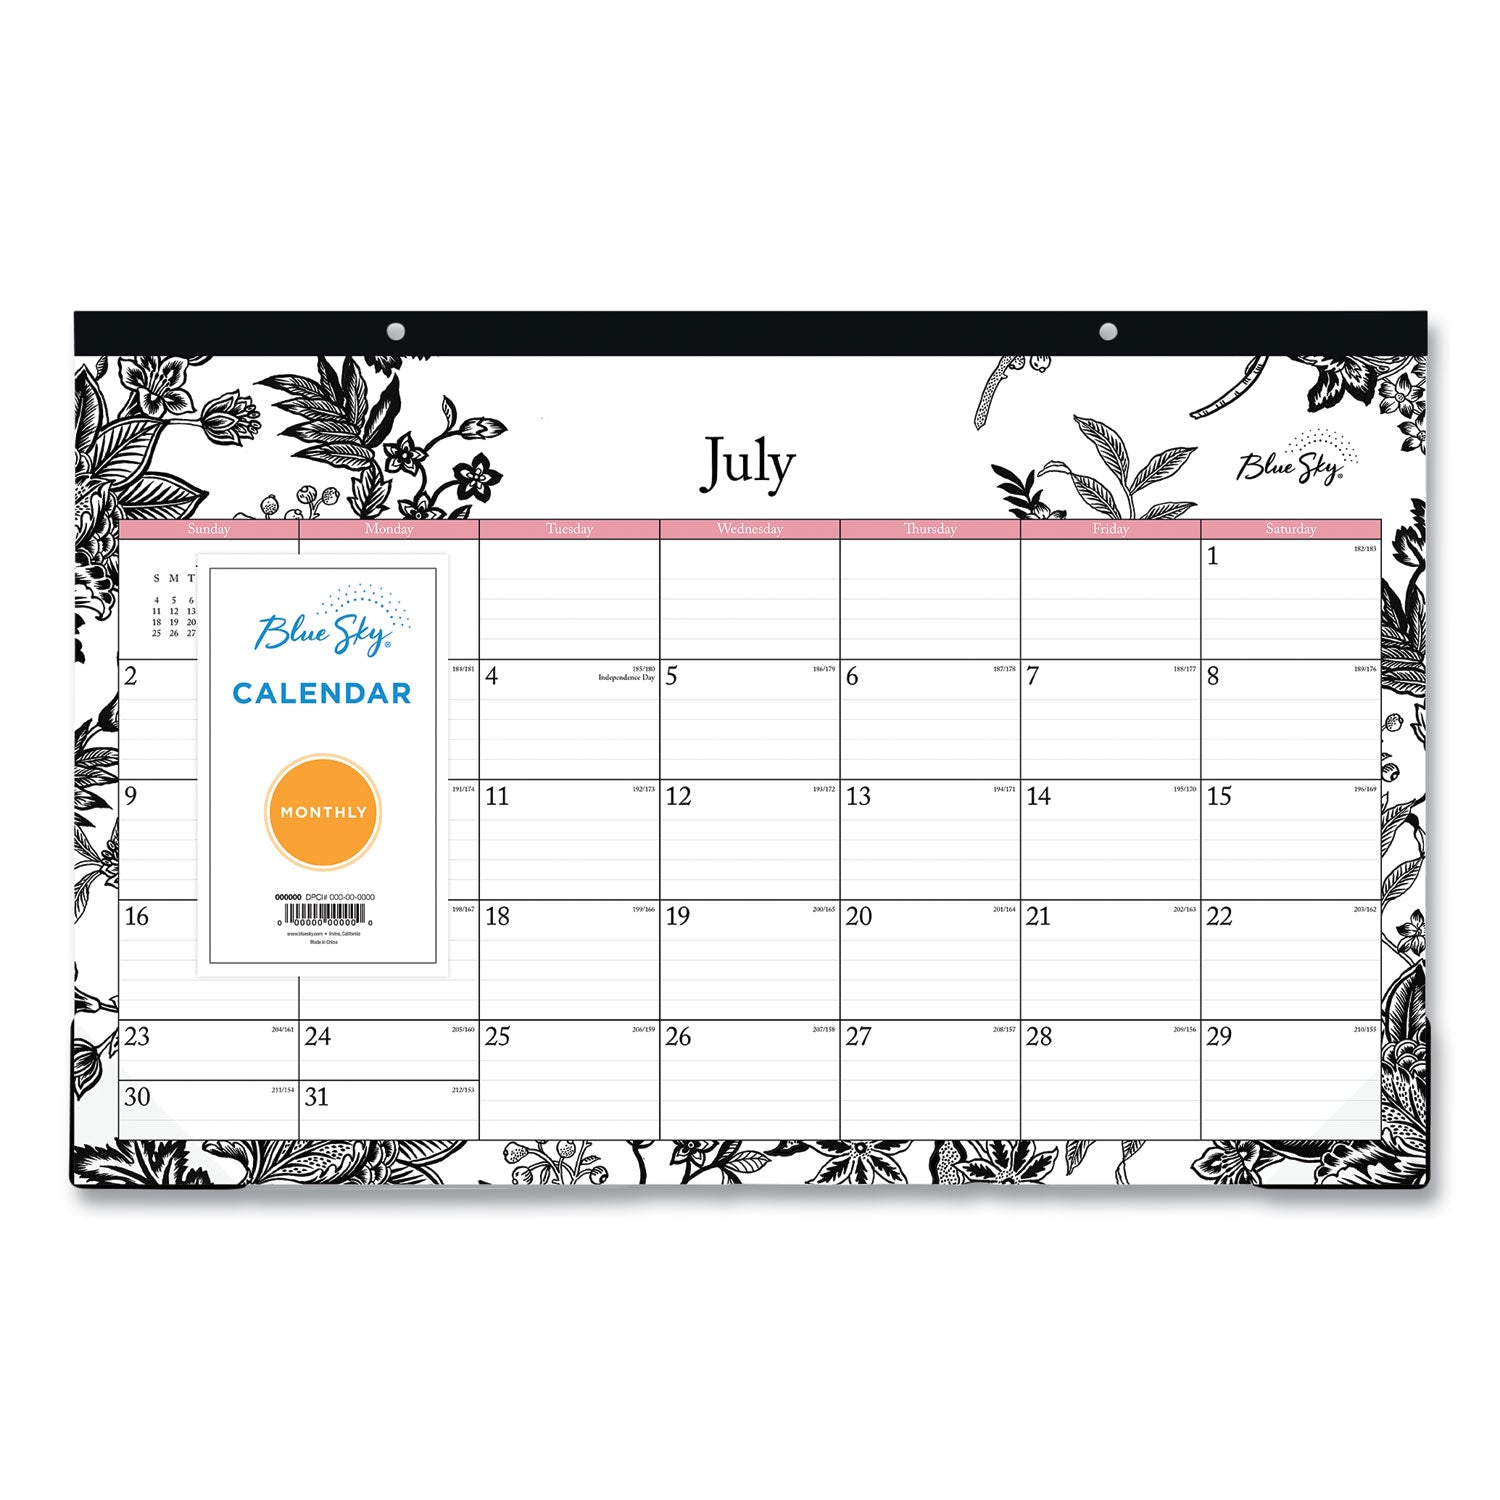 analeis-academic-year-desk-pad-calendar-floral-artwork-17-x-11-white-black-pink-sheets-12-month-july-to-june-2023-2024_bls130617 - 2